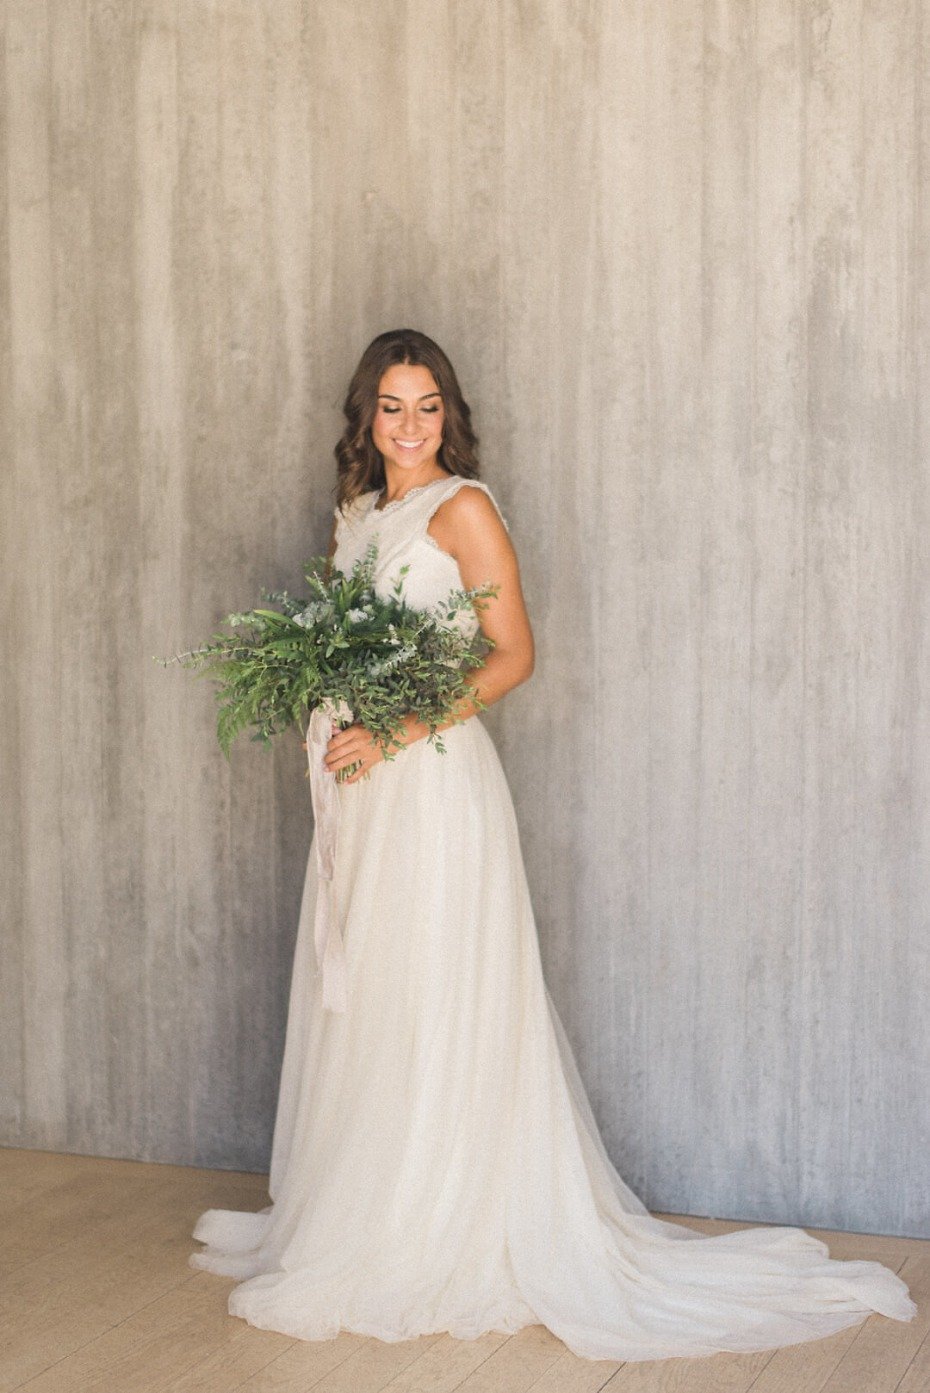 bridal style with a casual chic vibe